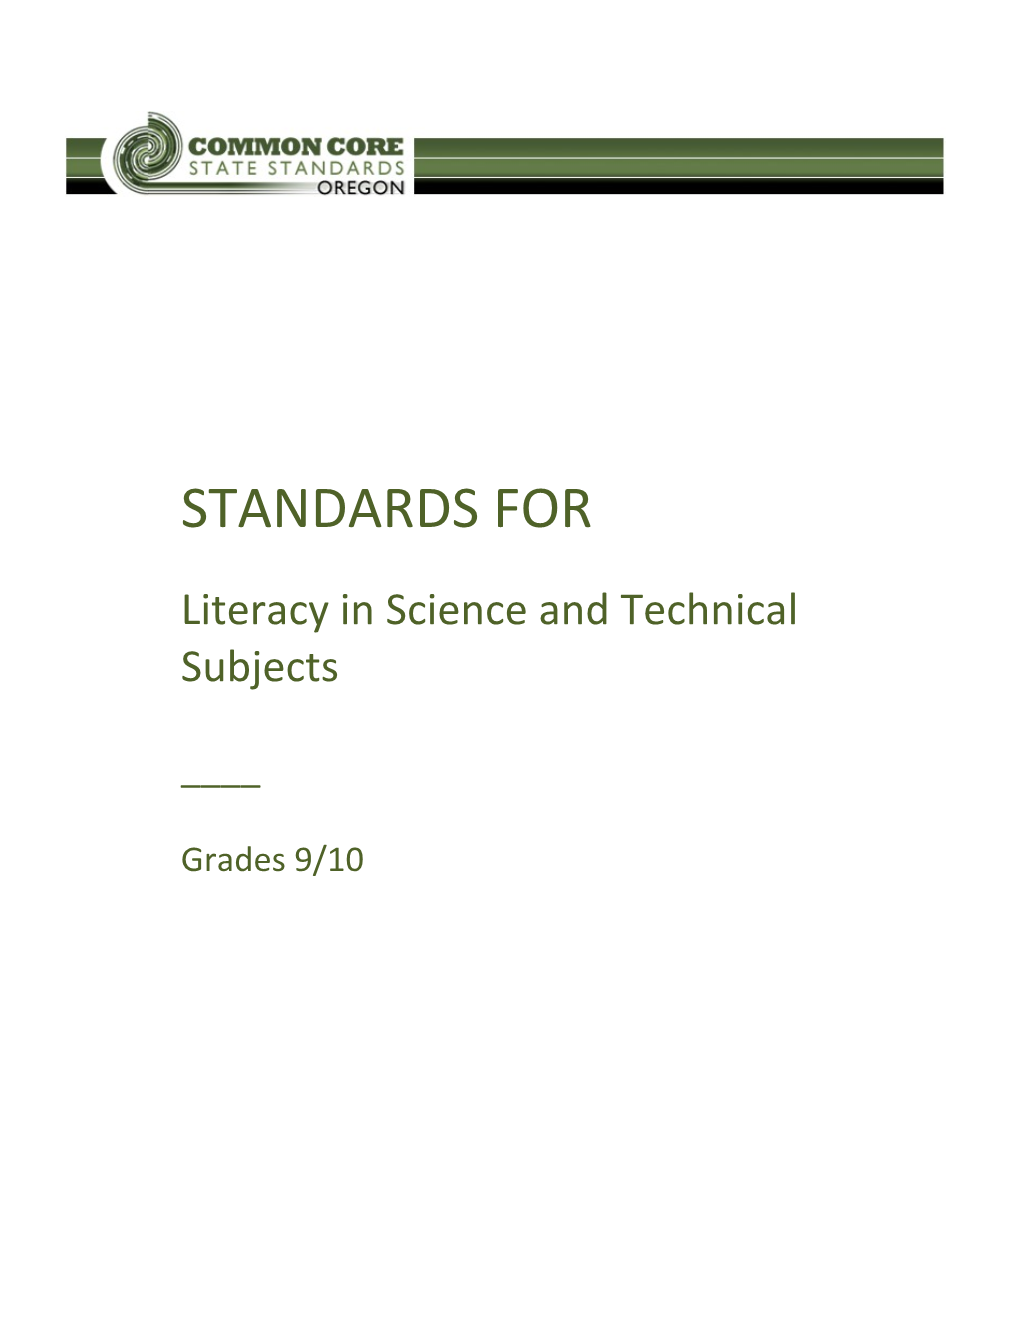 Literacy in Science and Technical Subjects